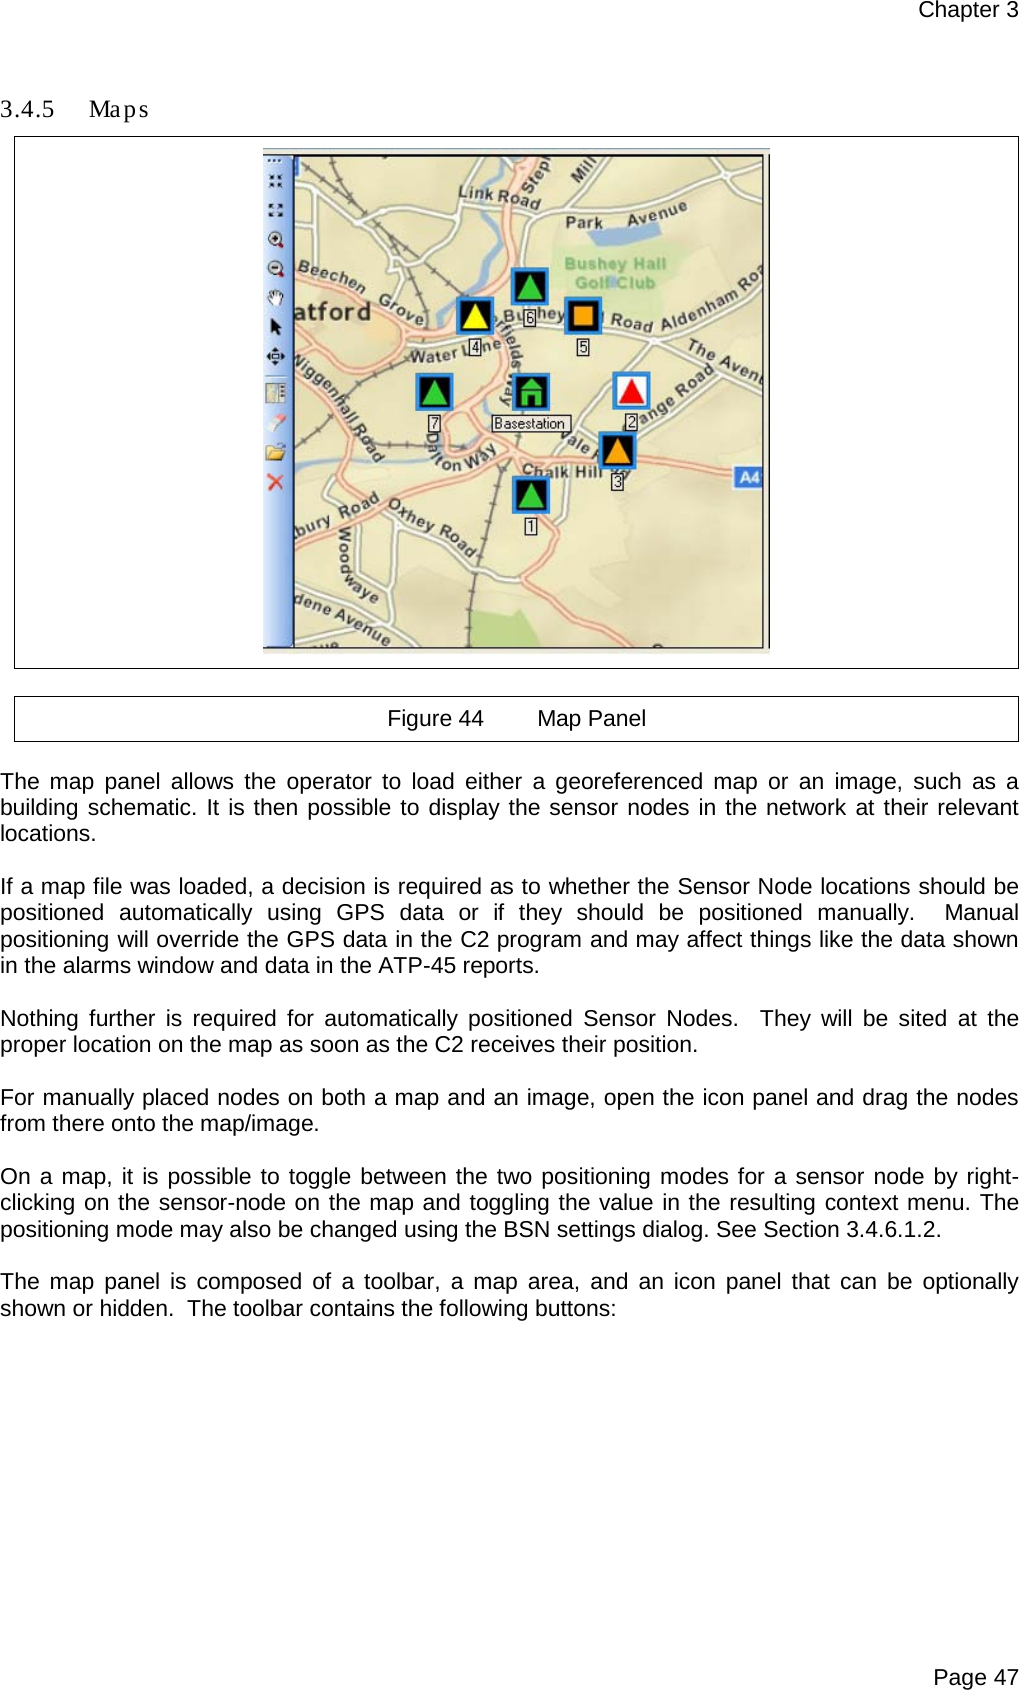 Chapter 3 Page 47  3.4.5 Ma p s    Figure 44 Map Panel  The map panel allows the operator to load either a georeferenced map or an image, such as a building schematic. It is then possible to display the sensor nodes in the network at their relevant locations.   If a map file was loaded, a decision is required as to whether the Sensor Node locations should be positioned  automatically using GPS data or if they should be positioned manually.  Manual positioning will override the GPS data in the C2 program and may affect things like the data shown in the alarms window and data in the ATP-45 reports.  Nothing further is required for automatically positioned  Sensor  Nodes.  They will be sited at the proper location on the map as soon as the C2 receives their position.  For manually placed nodes on both a map and an image, open the icon panel and drag the nodes from there onto the map/image.  On a map, it is possible to toggle between the two positioning modes for a sensor node by right-clicking on the sensor-node on the map and toggling the value in the resulting context menu. The positioning mode may also be changed using the BSN settings dialog. See Section 3.4.6.1.2.  The map panel is composed of a toolbar, a map area, and an icon panel that can be optionally shown or hidden.  The toolbar contains the following buttons:  